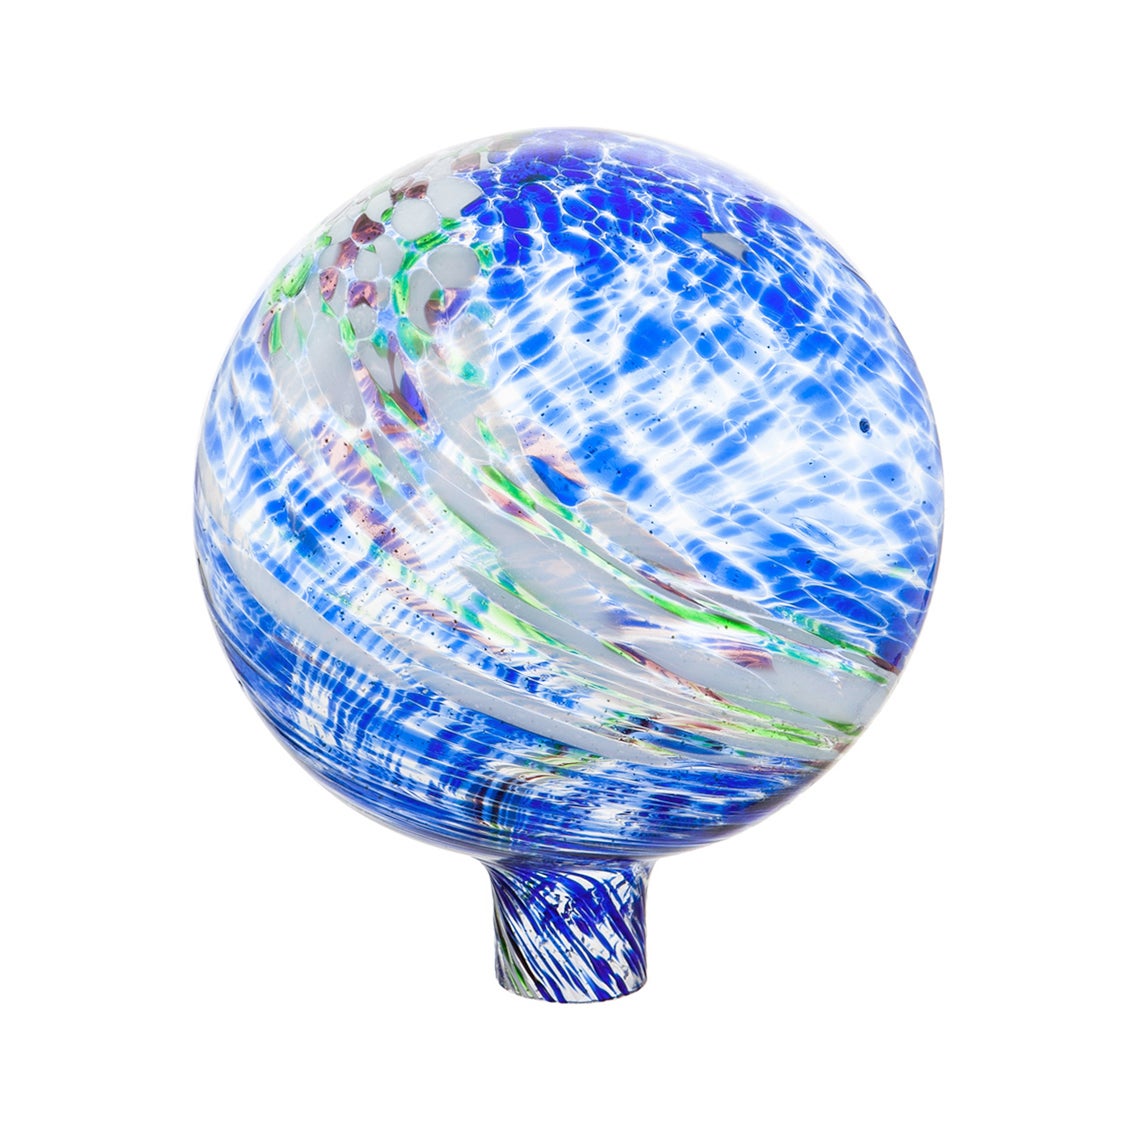 Blue and Green Glow-in-the-Dark Glass Gazing Ball, 10"